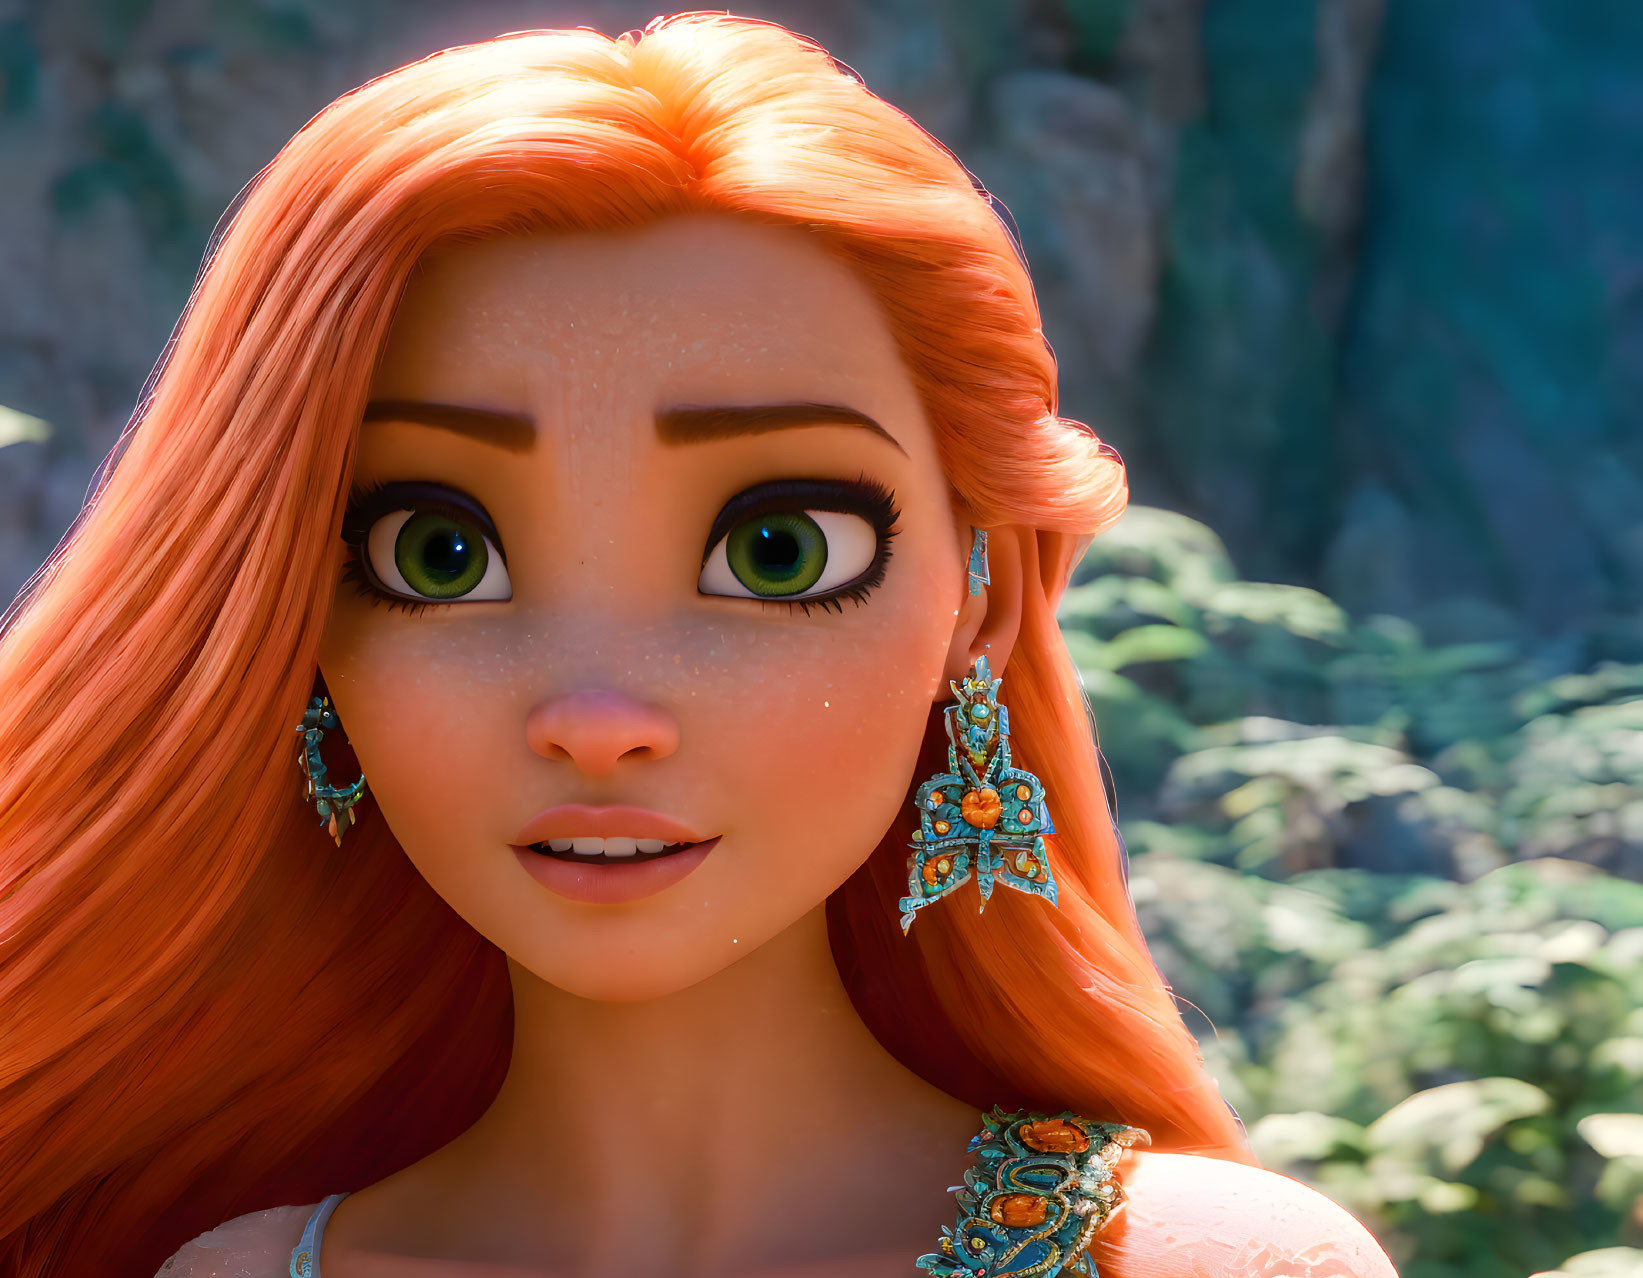 Vibrant animated character with orange hair and turquoise earrings